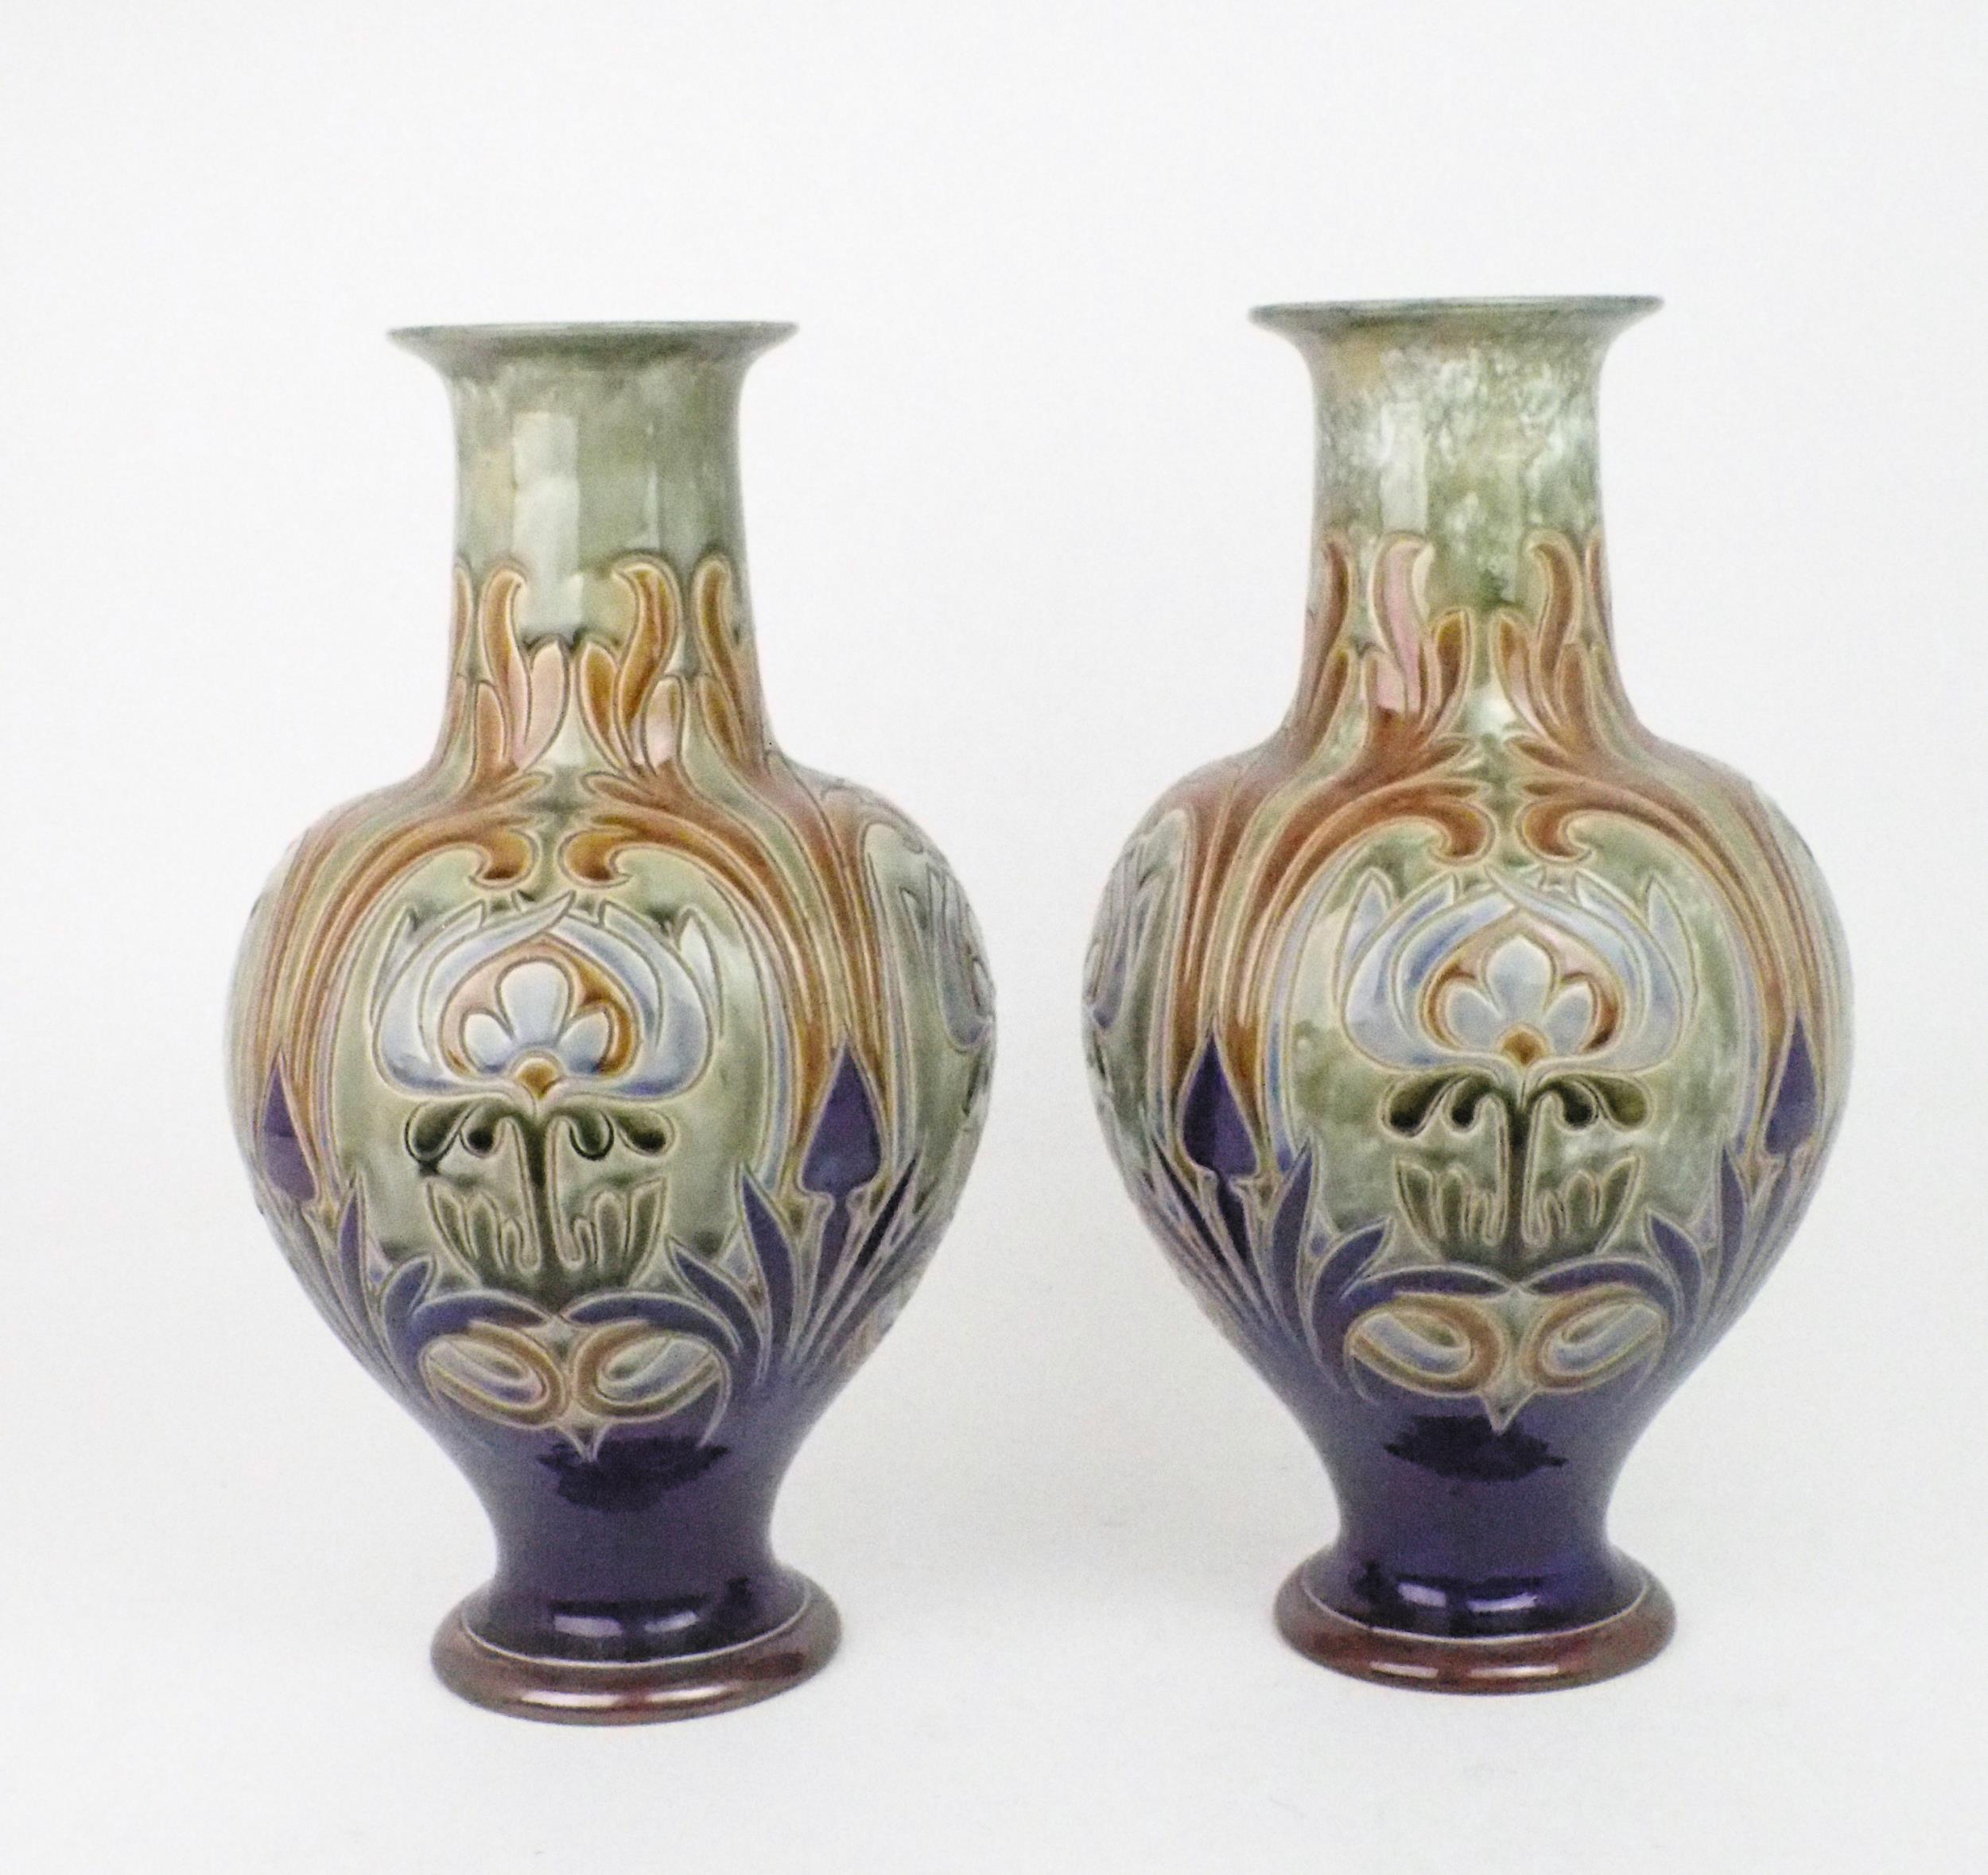 A PAIR OF ROYAL DOULTON VASES designed by Frank A Butler, of bulbous form with flaring neck - Image 3 of 6